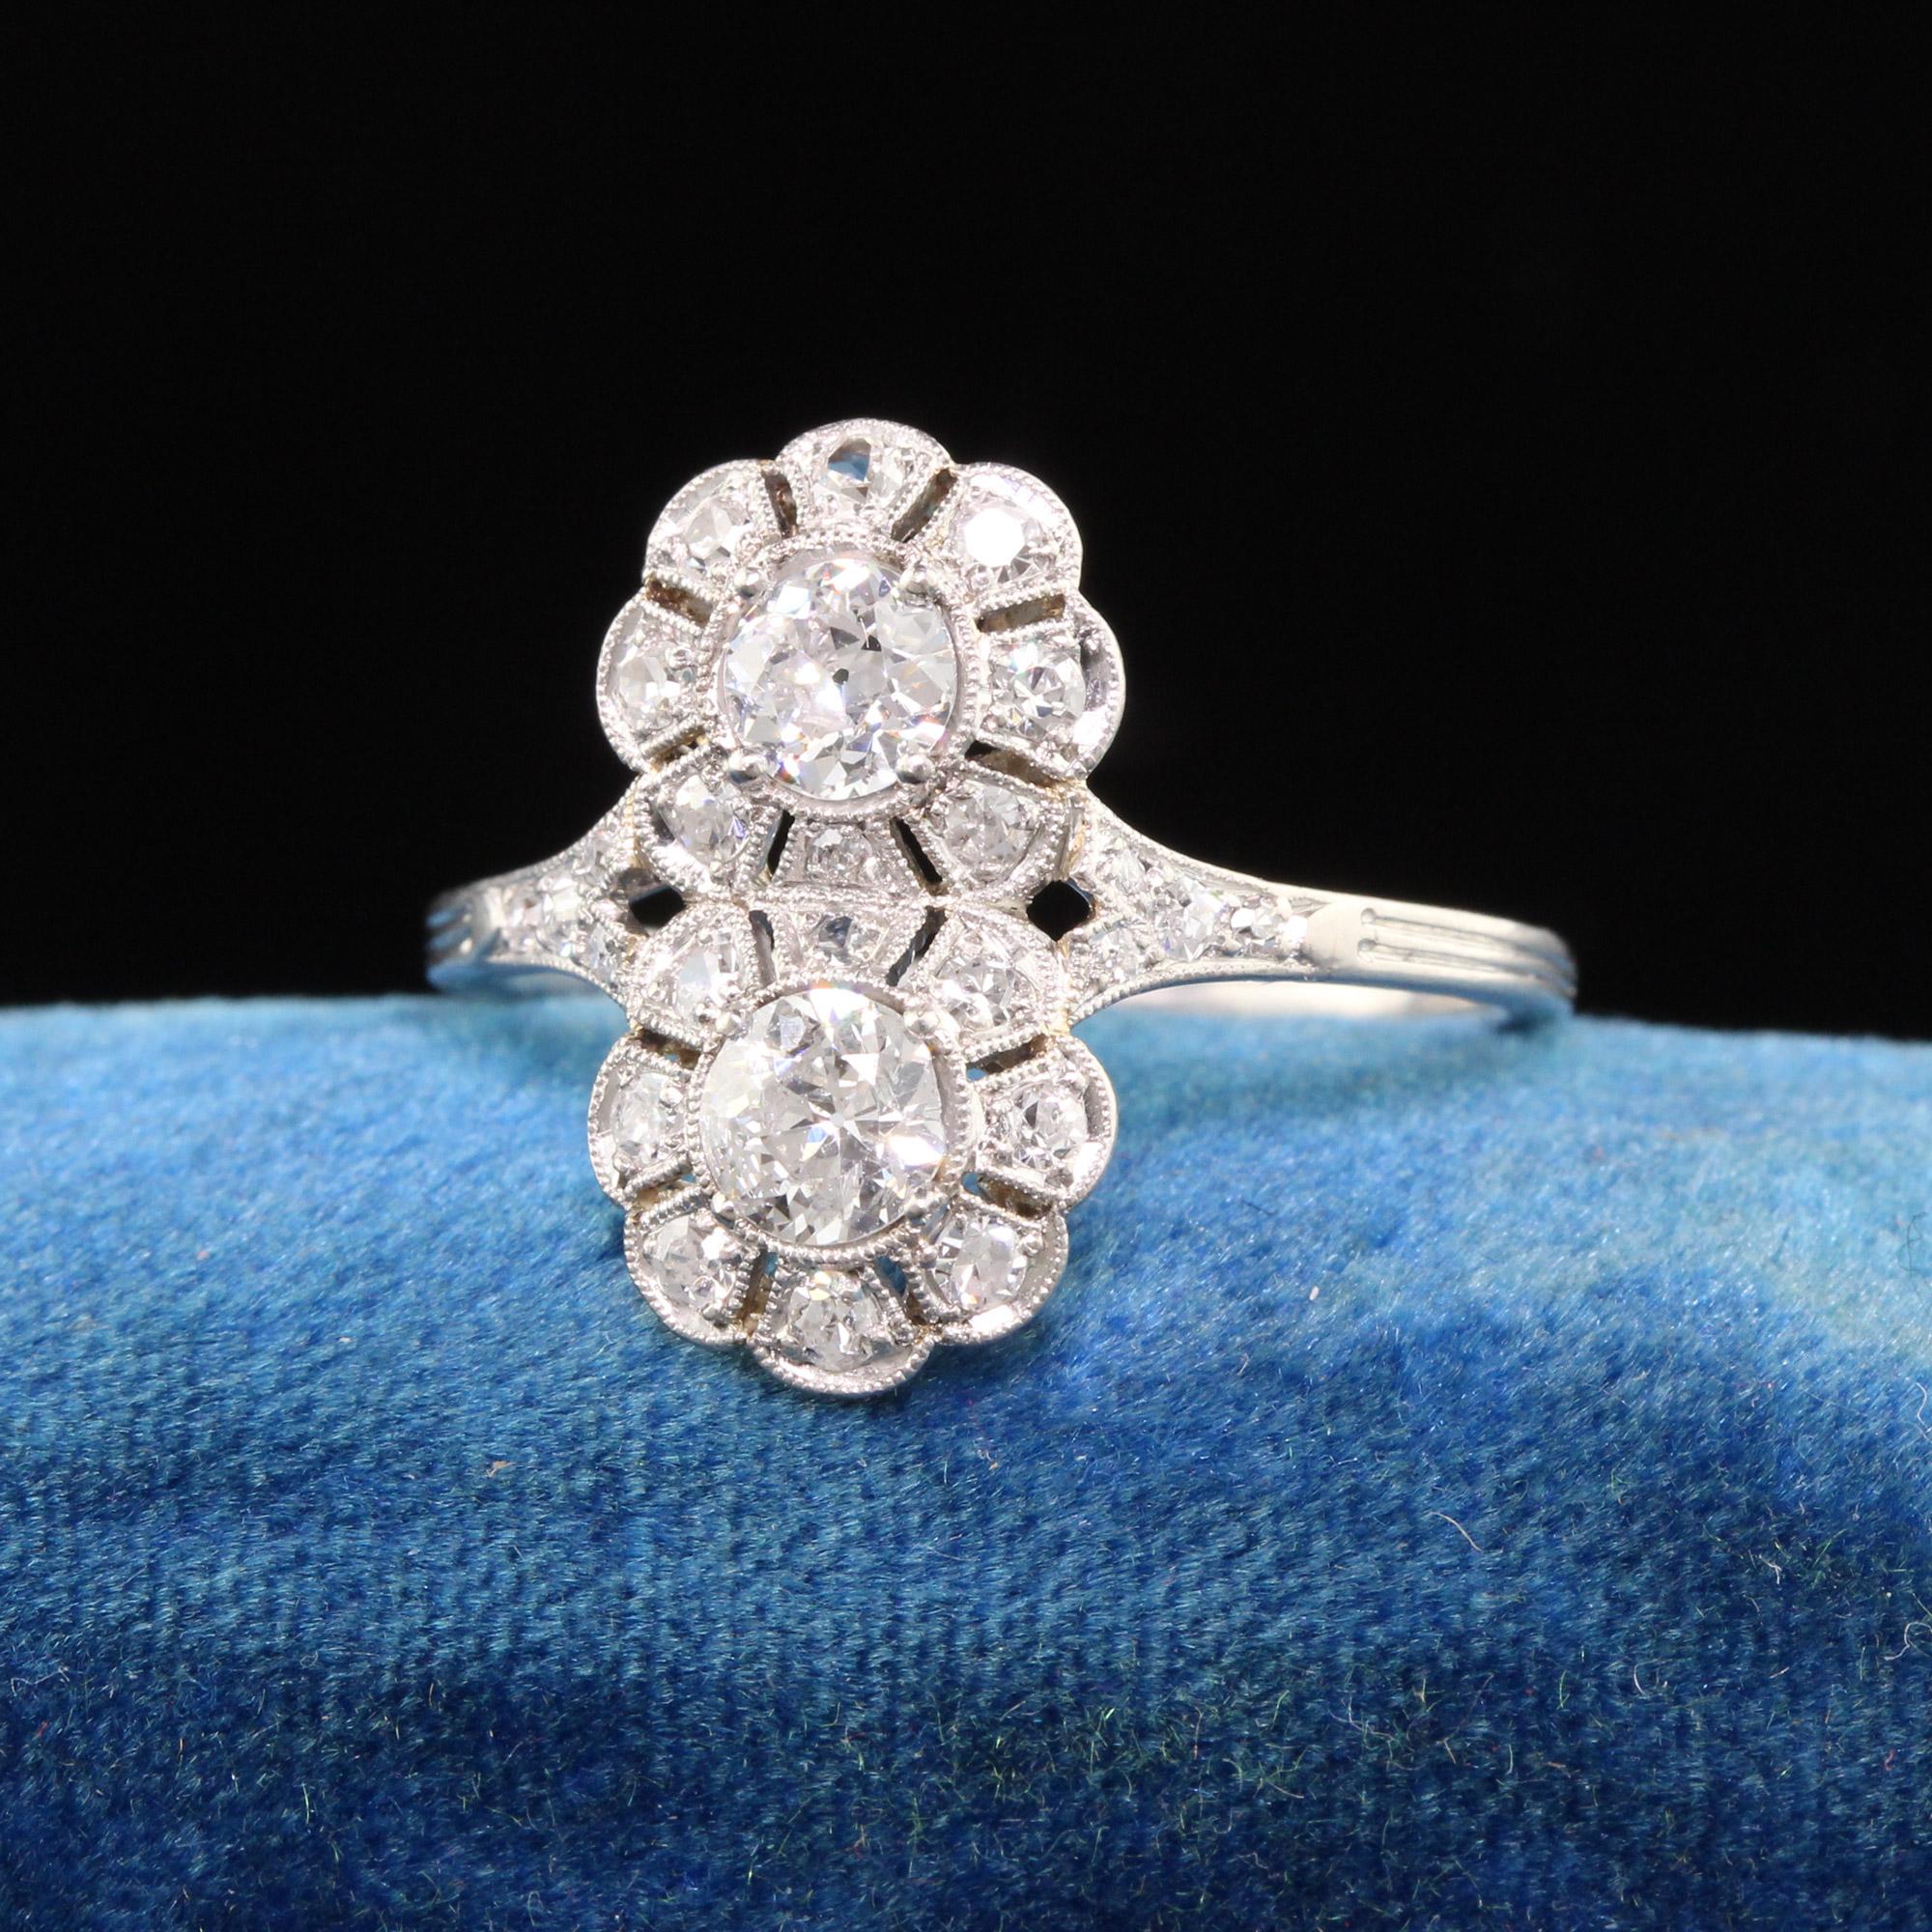 Beautiful Antique Art Deco Platinum Old European Diamond Floral Toi Et Moi Ring. This incredible Toi Et Moi ring features old europeal diamonds in the center of an amazing art deco setting with floral designs.

Item #R1068

Metal: Platinum

Weight: